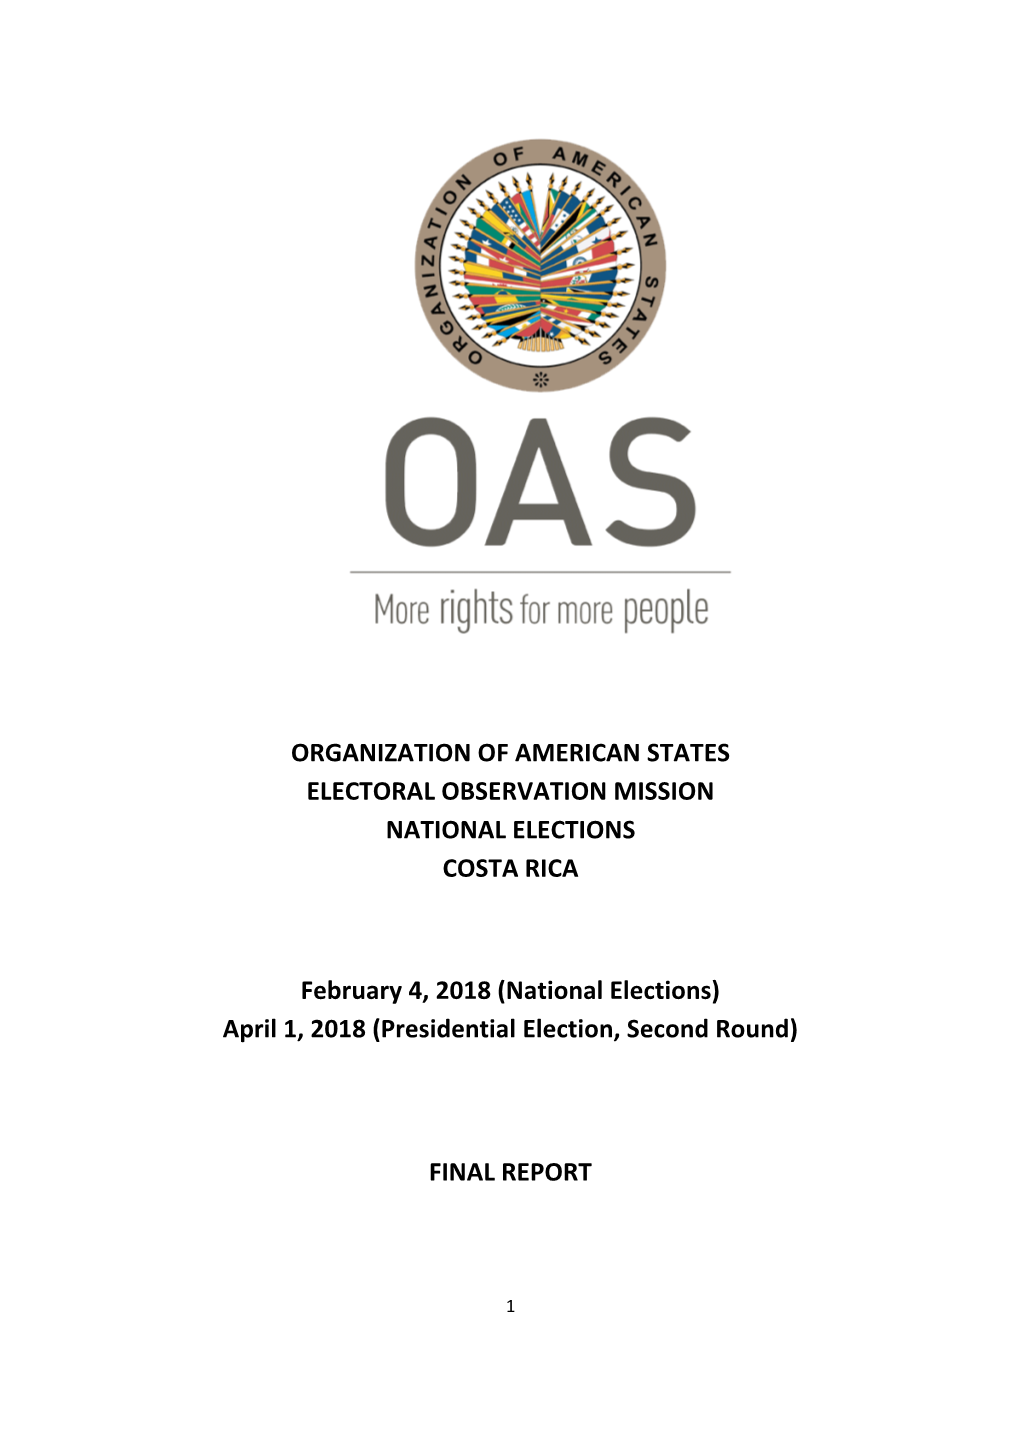 ORGANIZATION of AMERICAN STATES ELECTORAL OBSERVATION MISSION NATIONAL ELECTIONS COSTA RICA February 4, 2018 (National Election